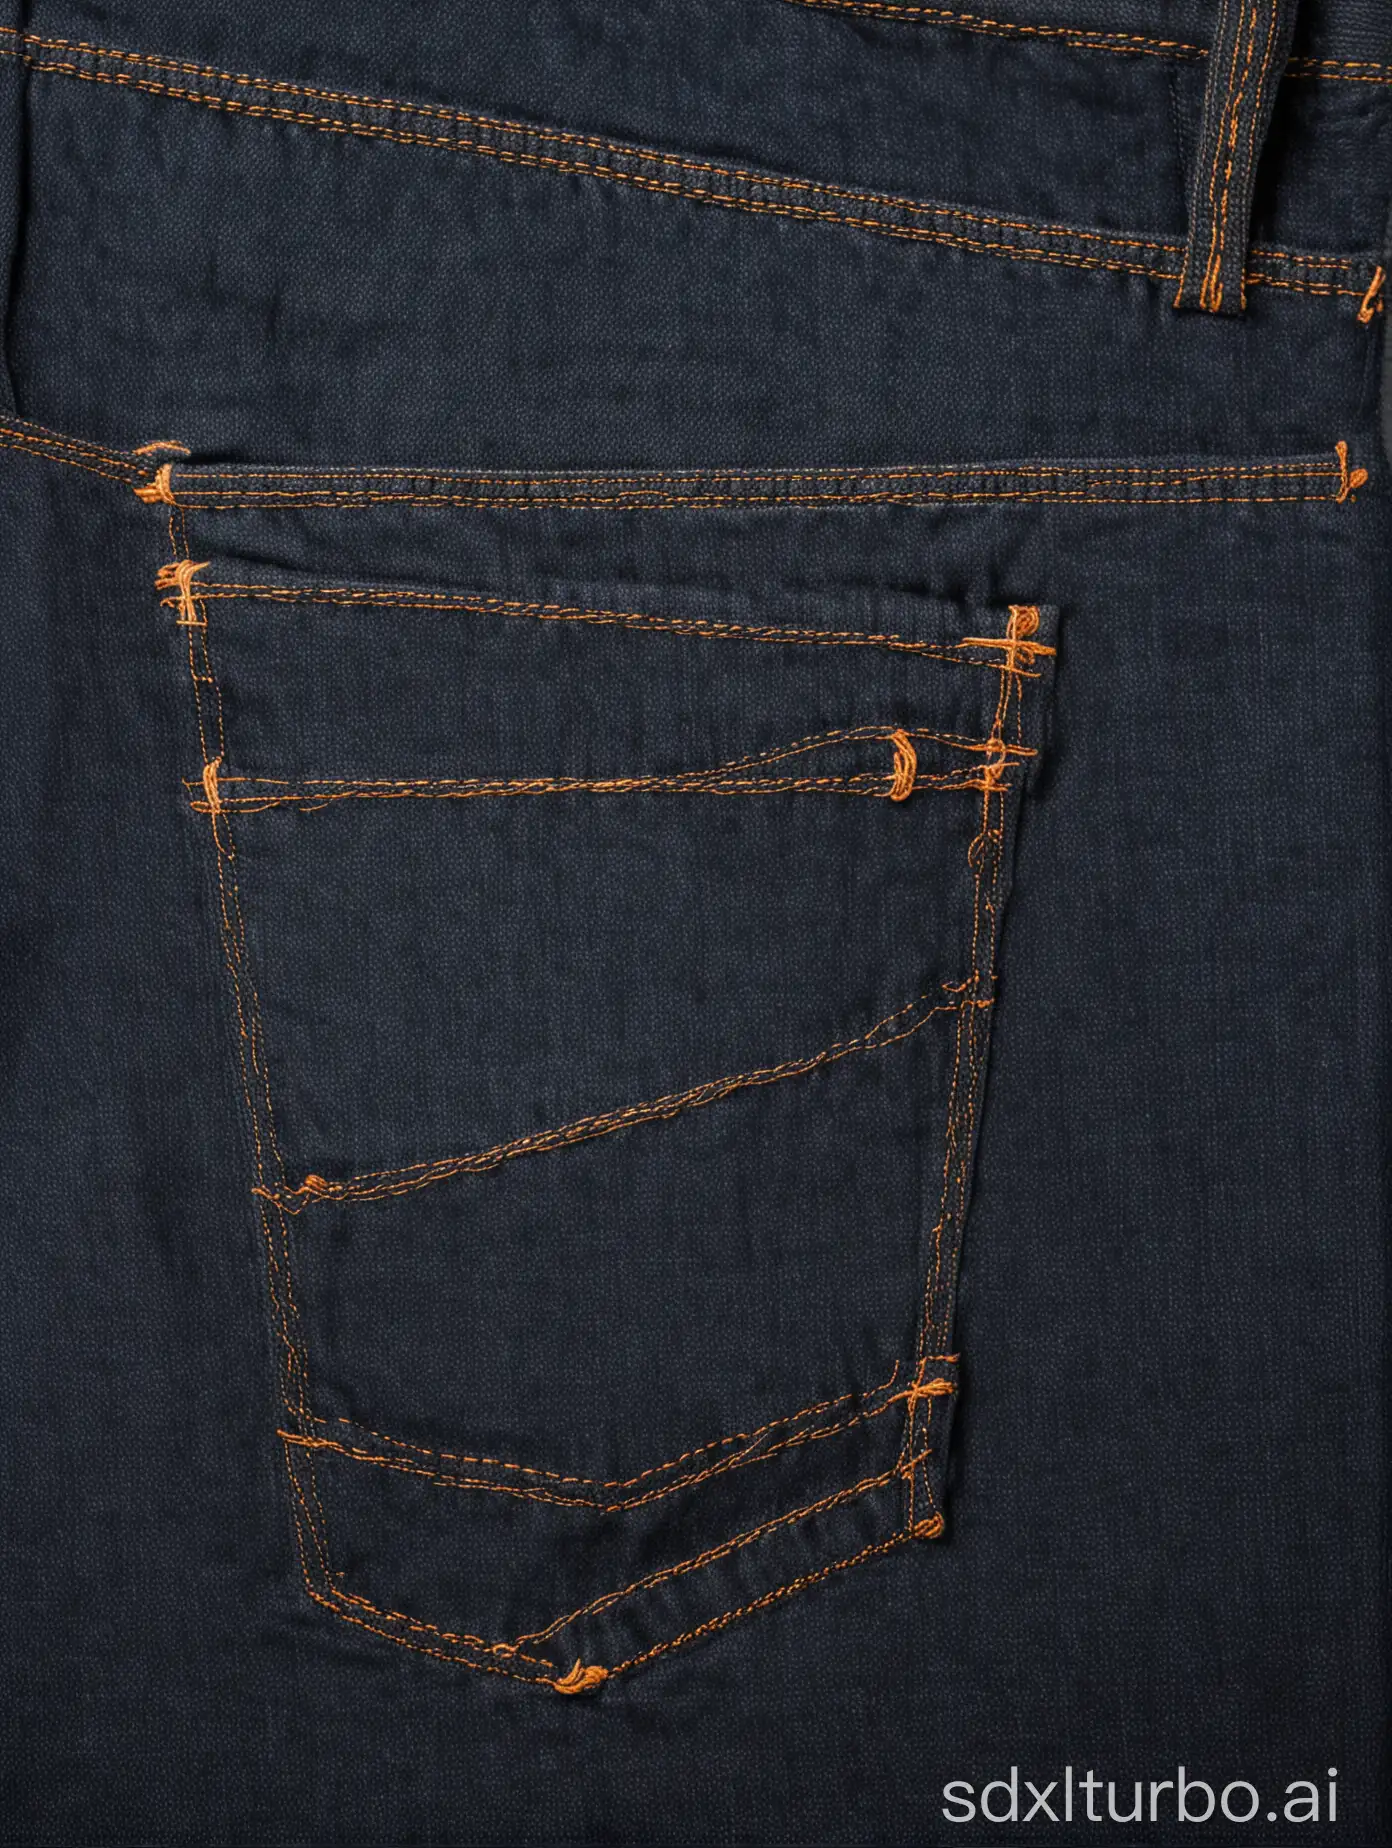 Detailed-CloseUp-of-Dark-Blue-Jeans-with-Classic-FivePocket-Design